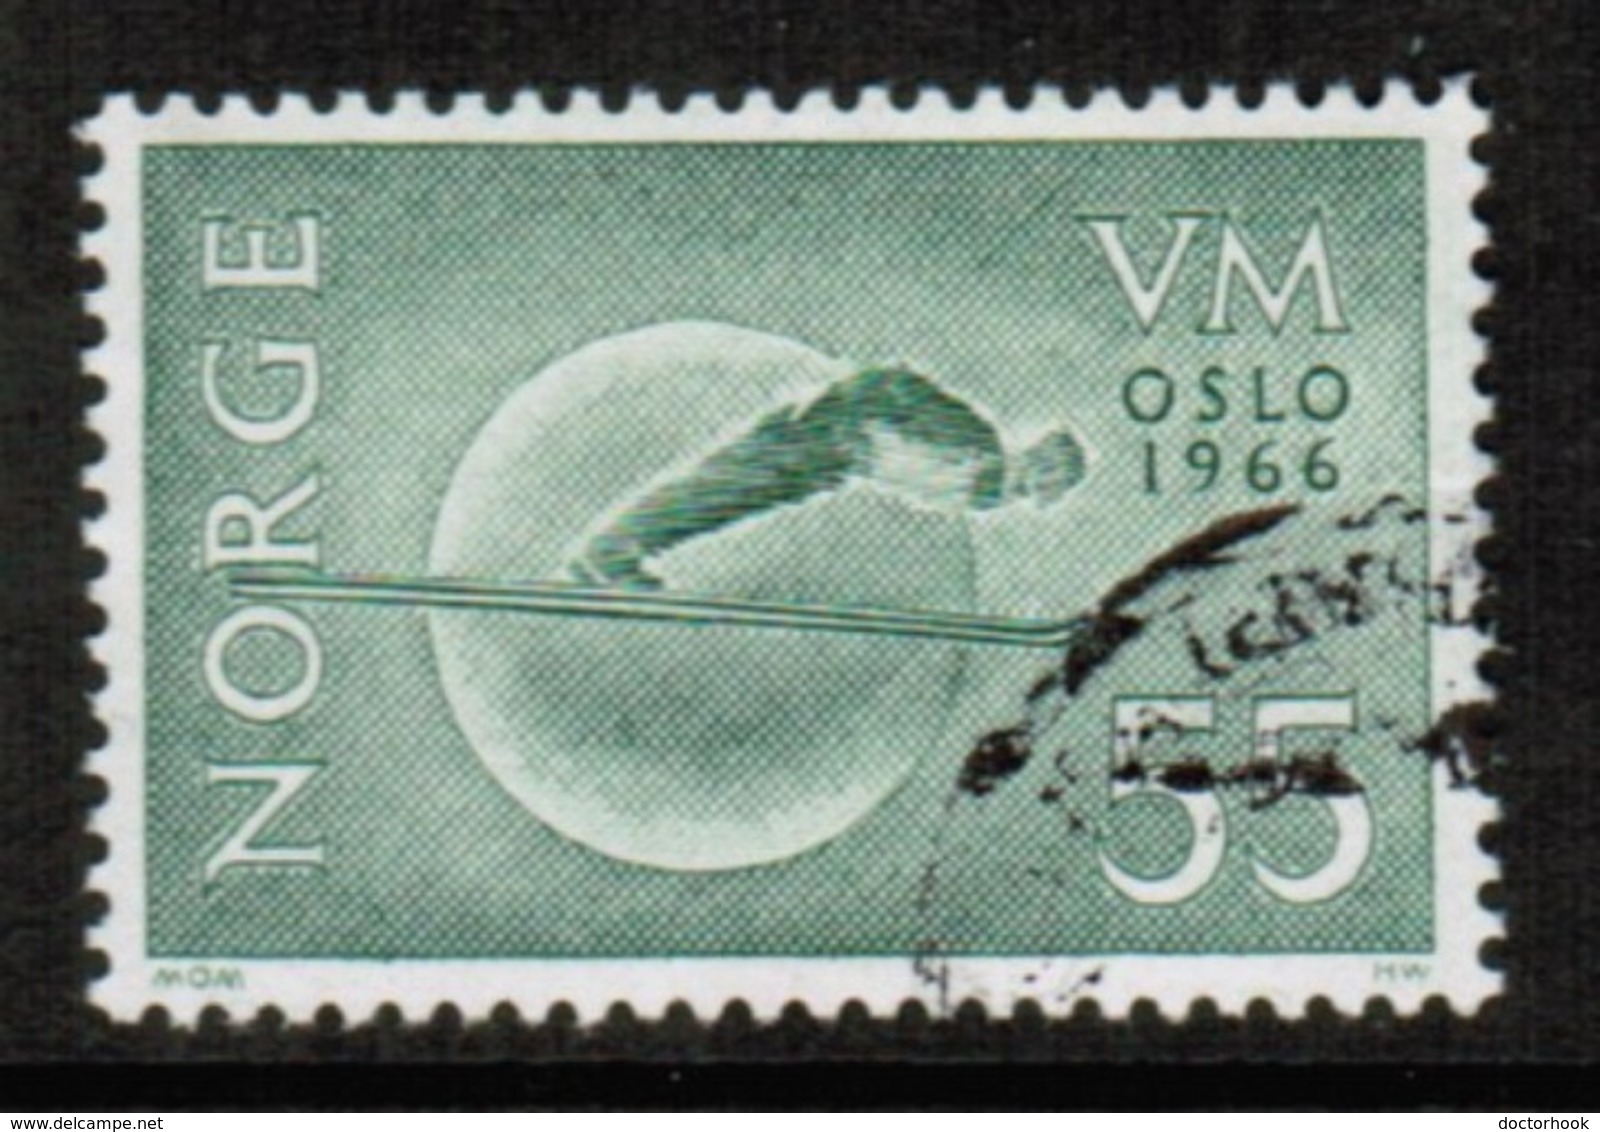 NORWAY   Scott # 487 VF USED (Stamp Scan # 442) - Used Stamps